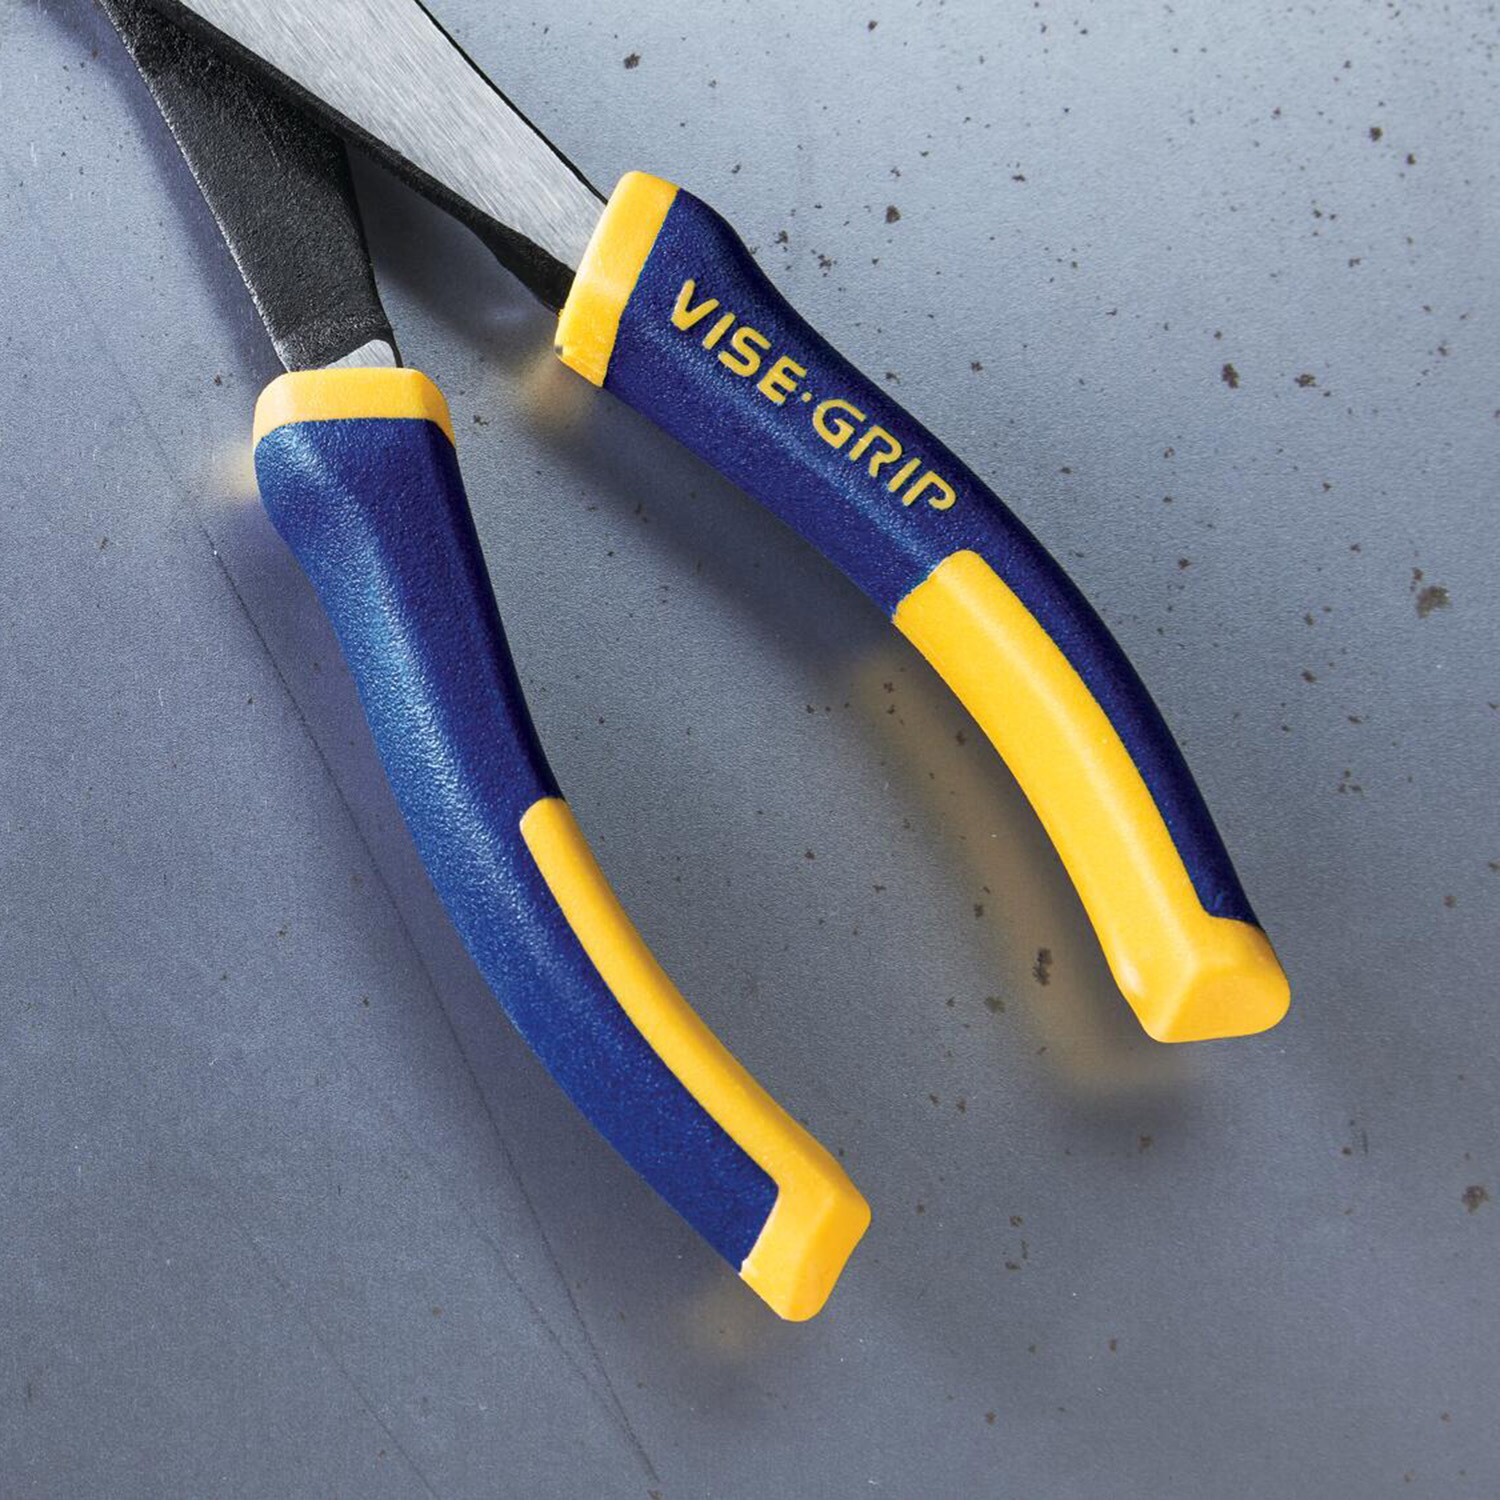 IRWIN Vise-Grip ProTouch 6-in Electrical Diagonal Cutting Pliers